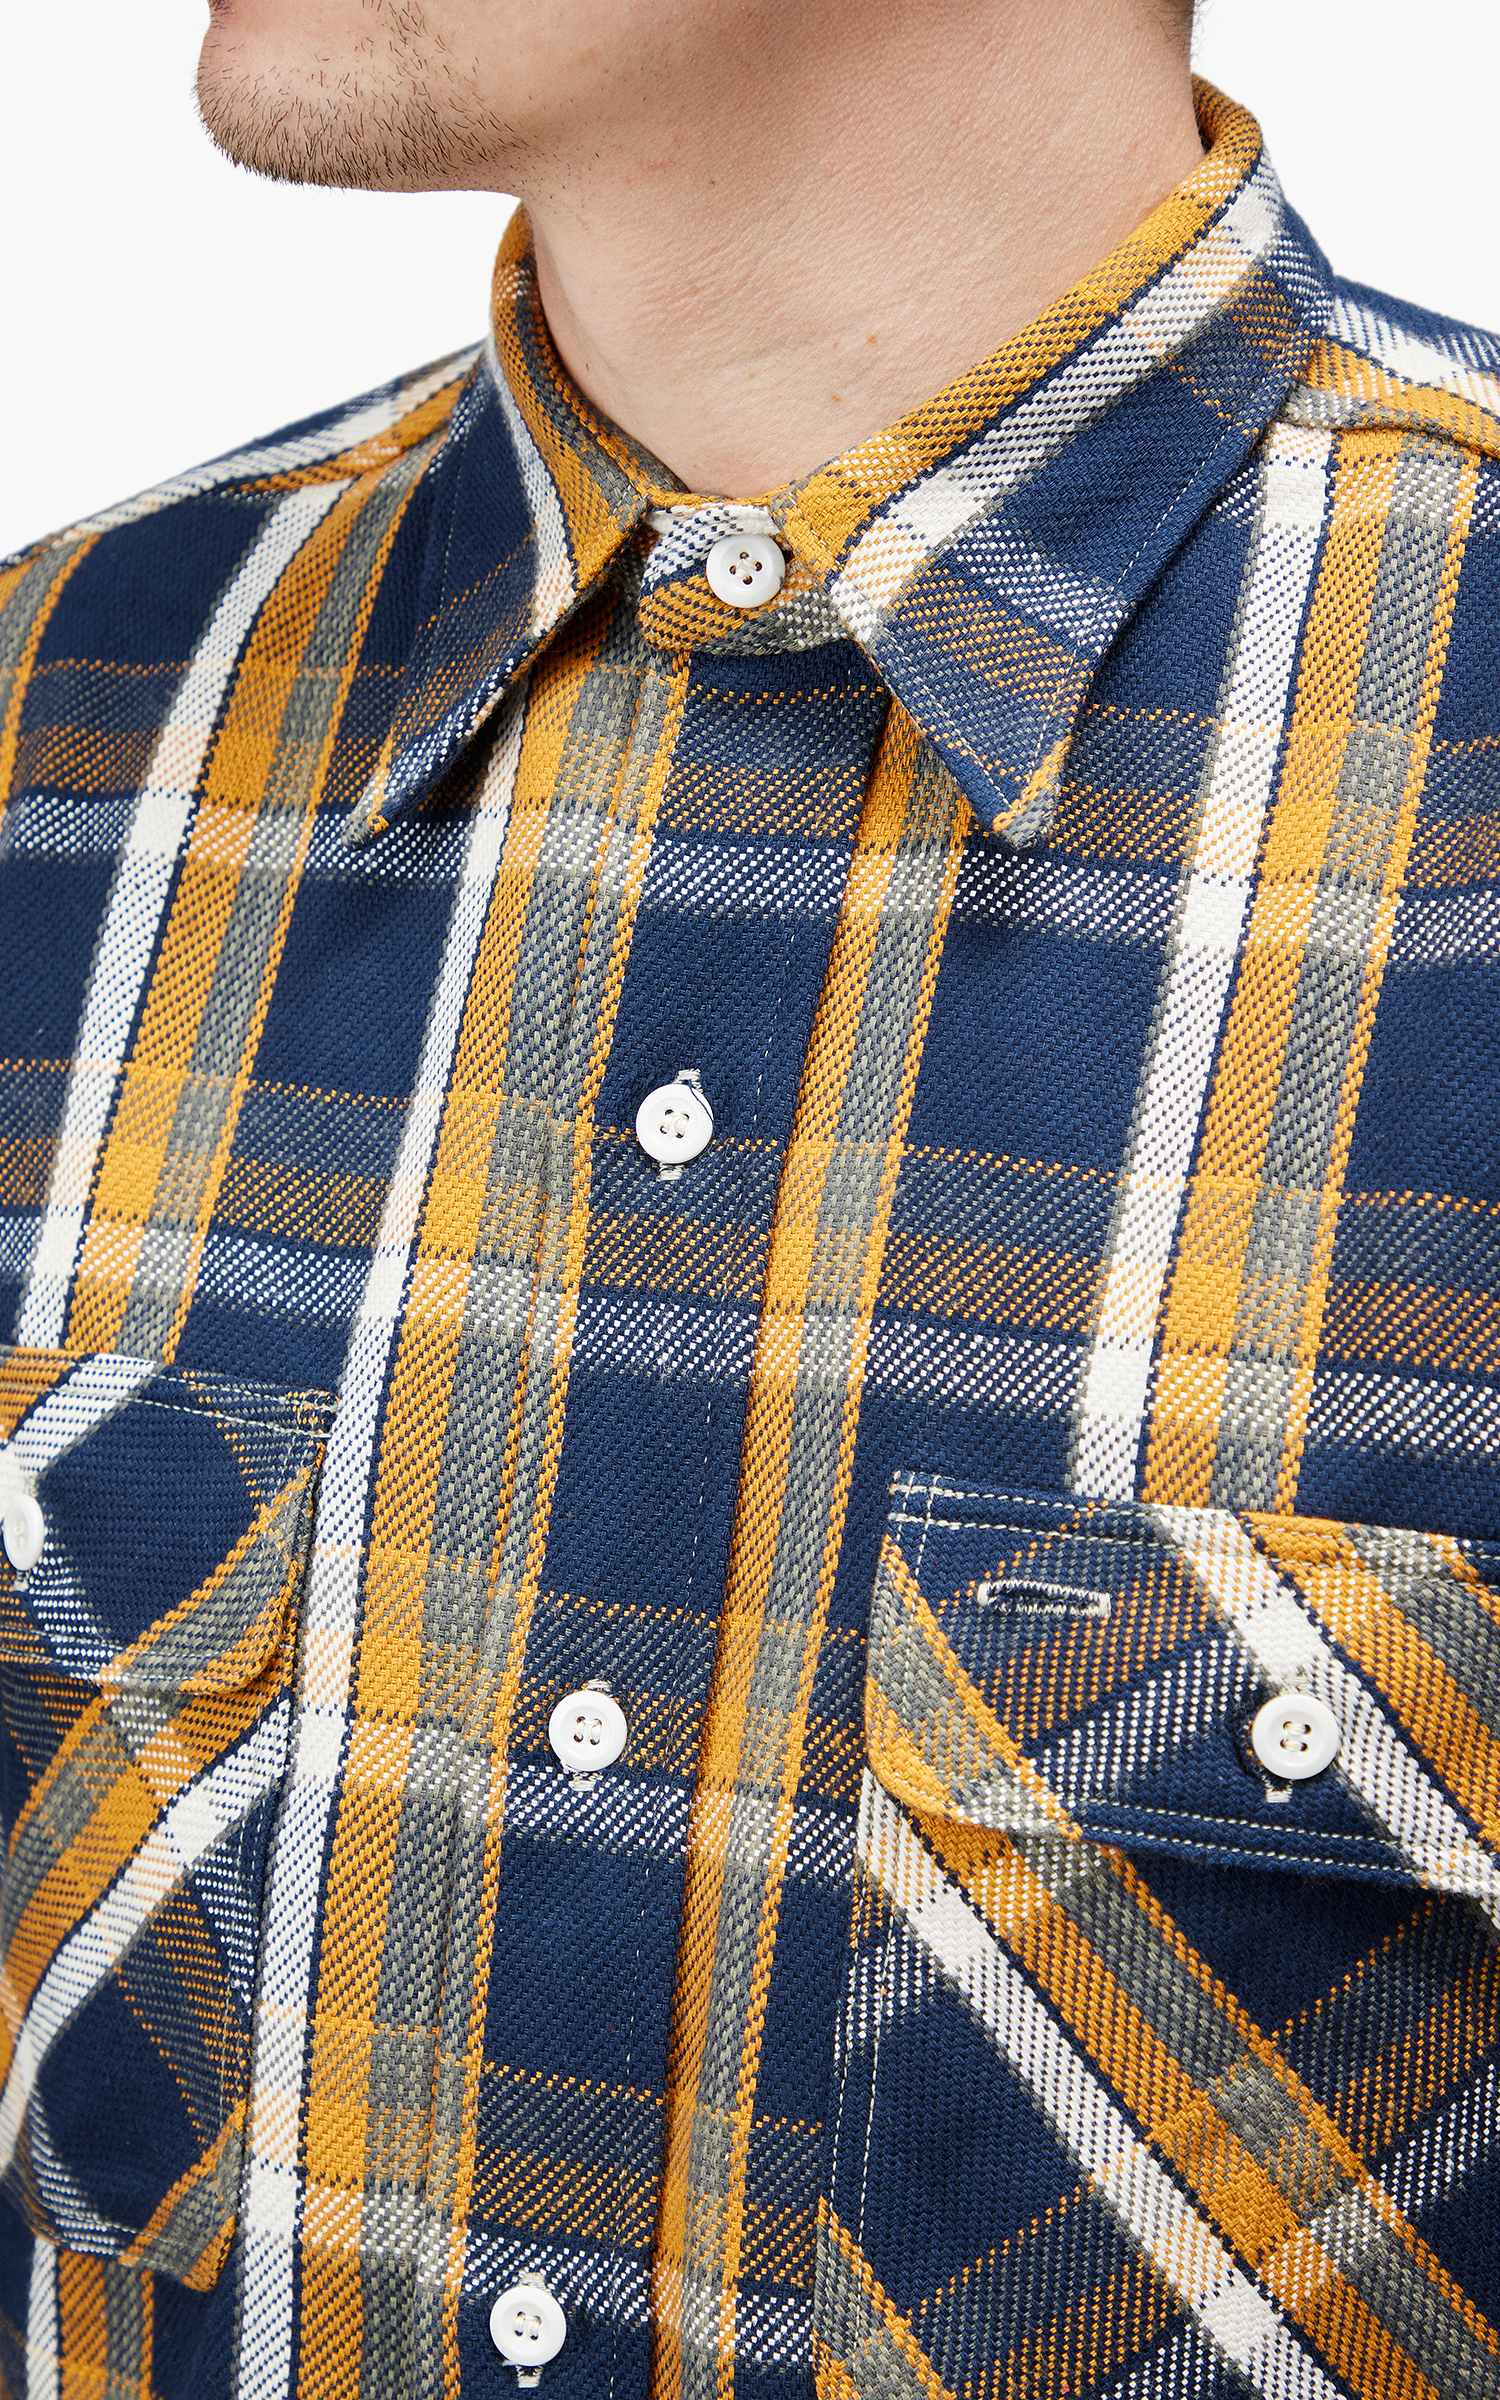 Warehouse & Co. 3104 Flannel Shirt Navy | Cultizm